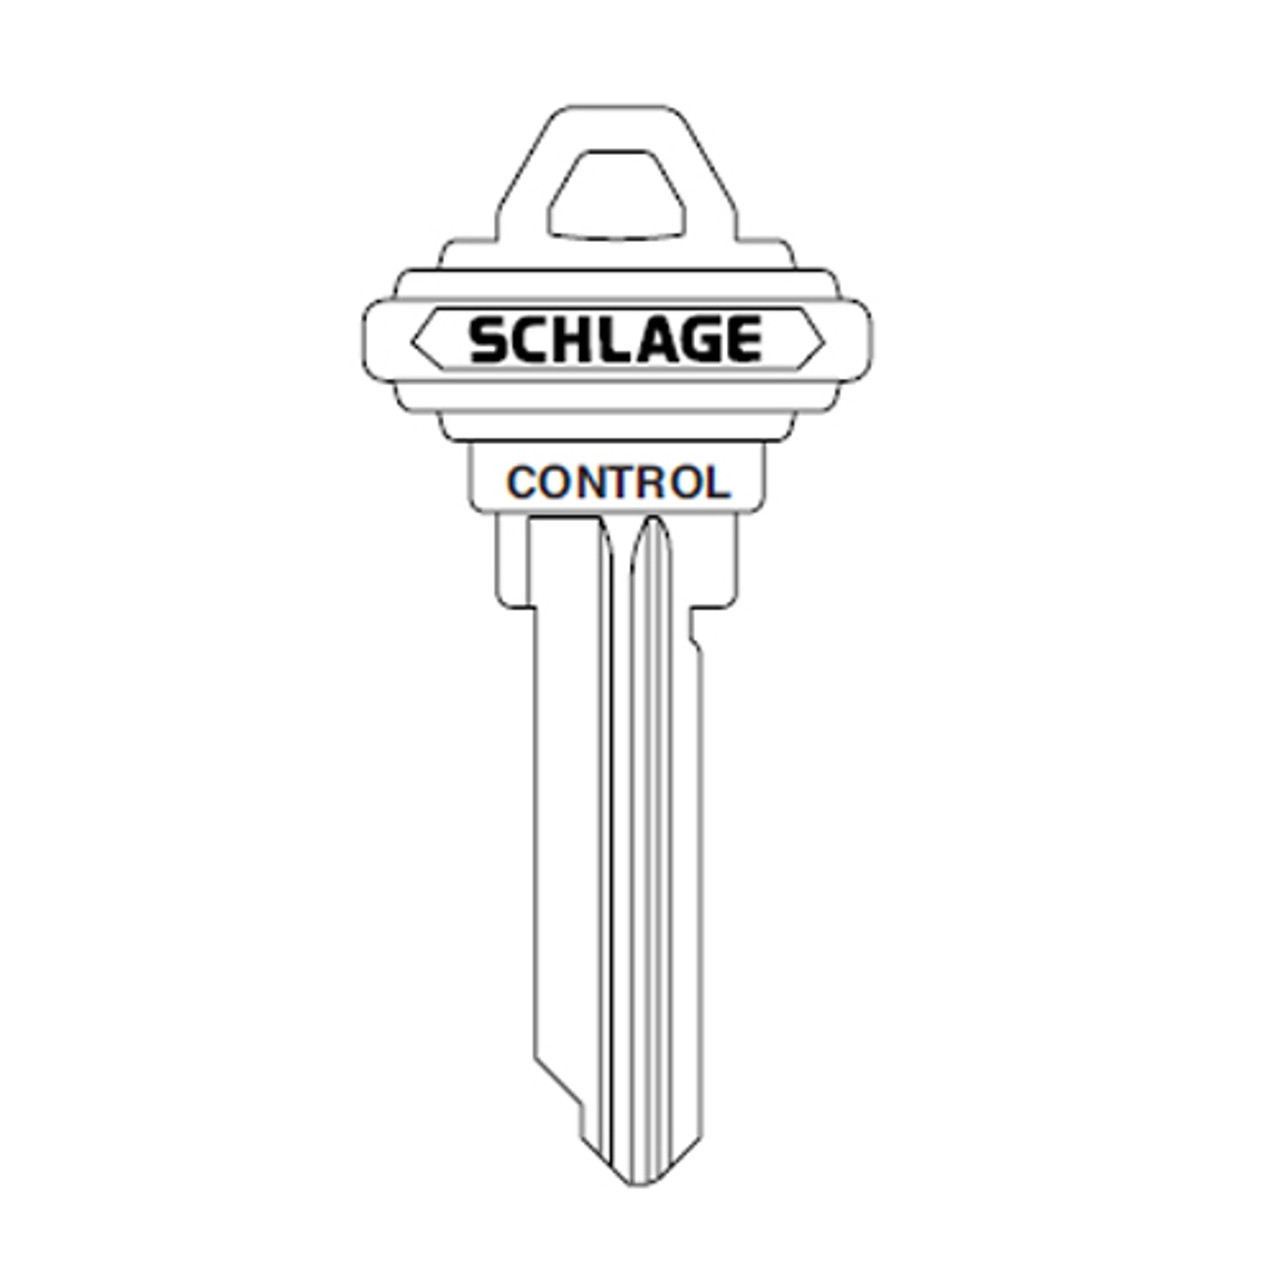 35-056-G Schlage Lock Control Key Blank Standard Bow Embossed Both Sides